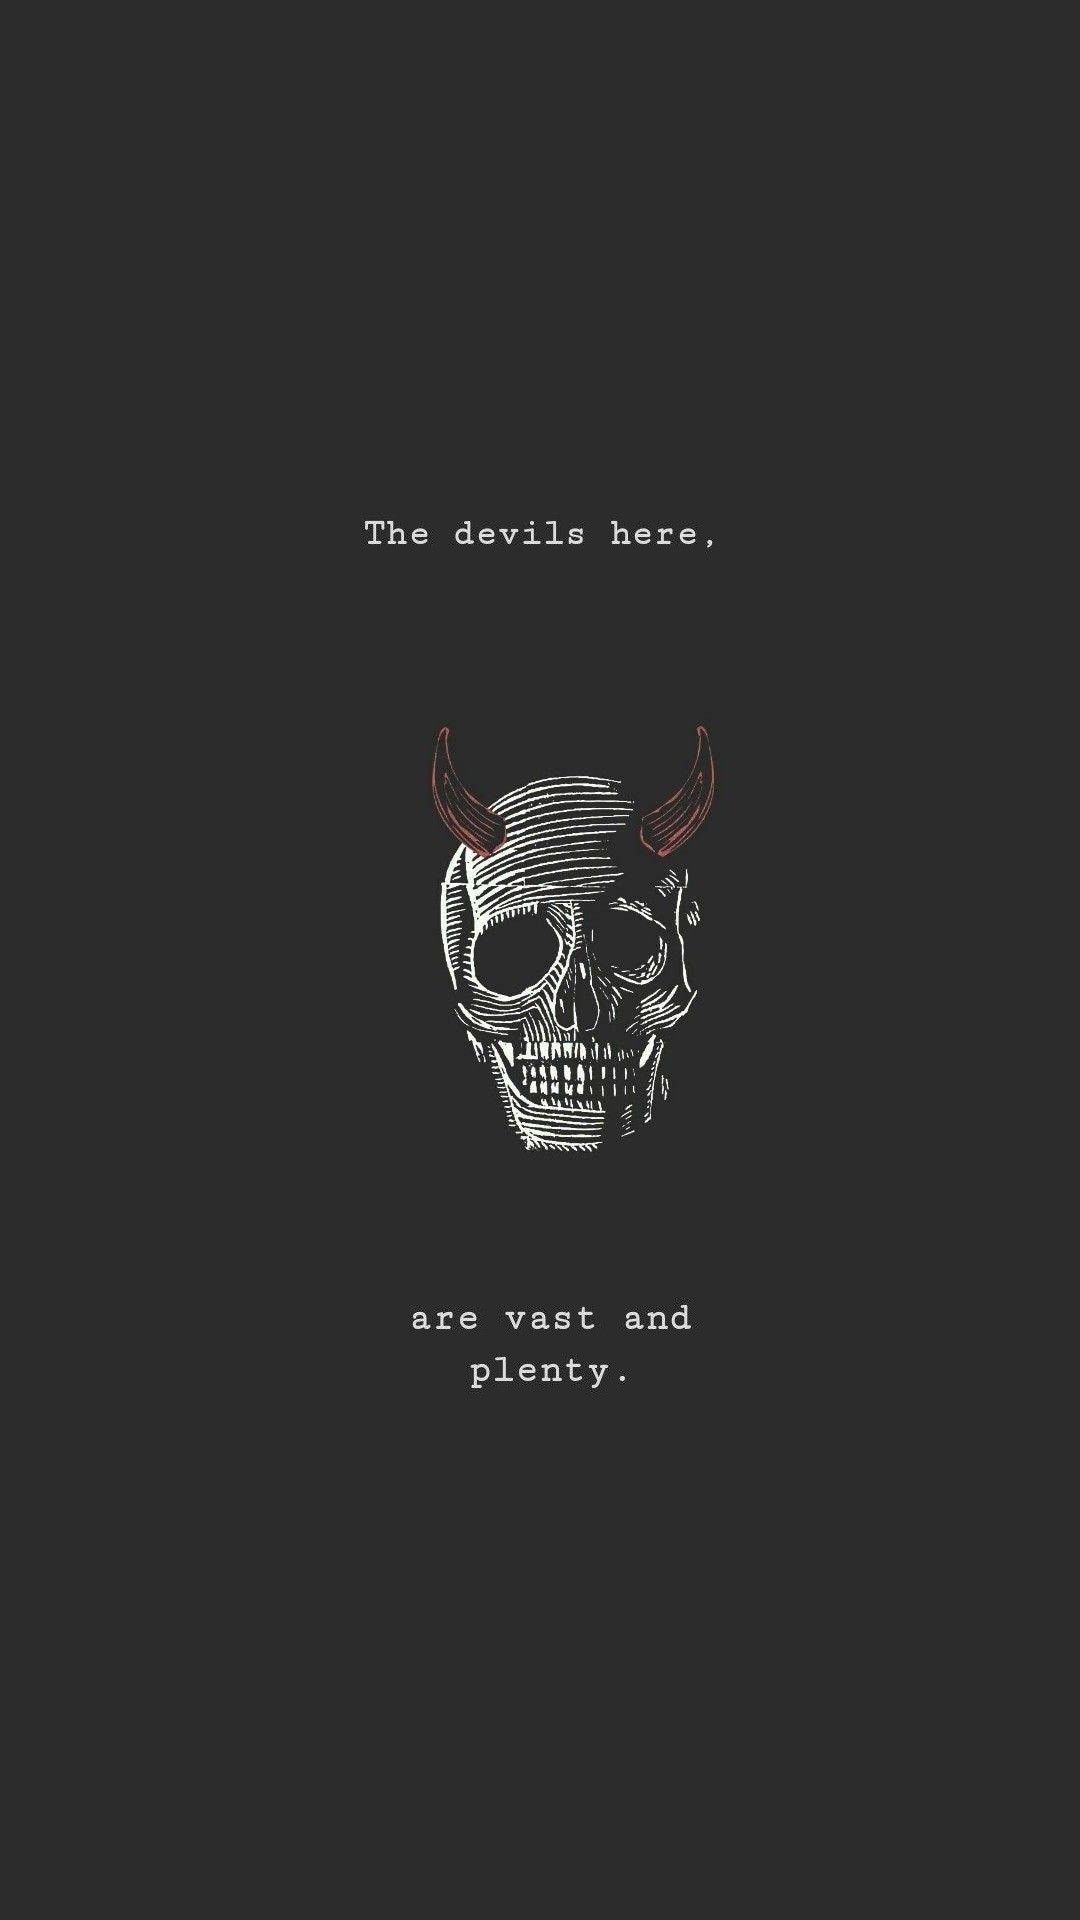 The devils here are vast and plenty. - Gothic